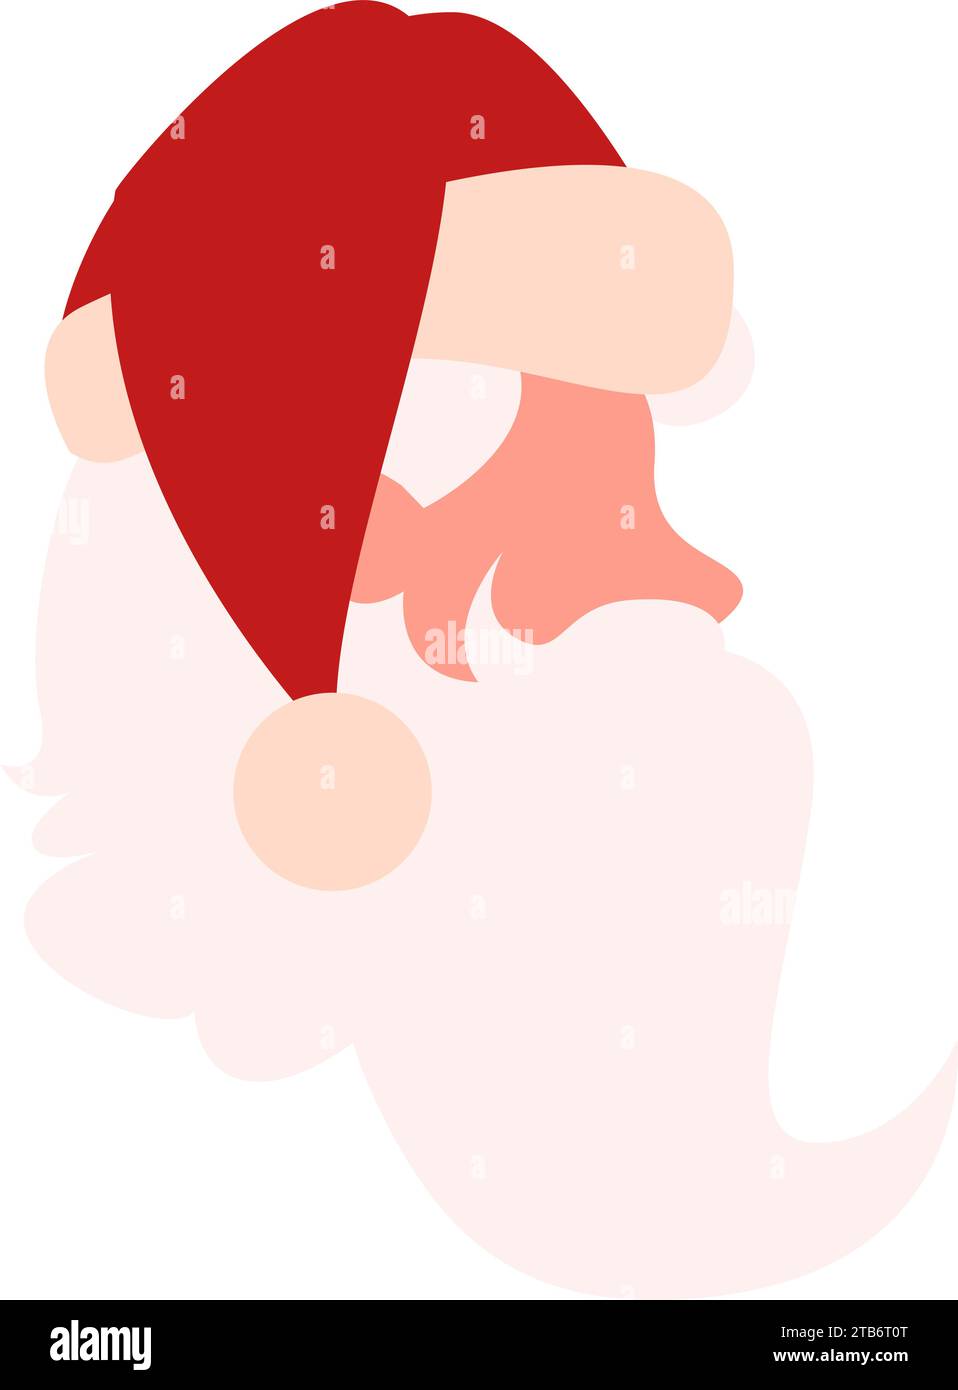 Red Pink Pop Art profile of Santa Claus face with lush white beard dressed in red cap. Flat Santa holiday icon. Christmas event element. Simple flat v Stock Vector